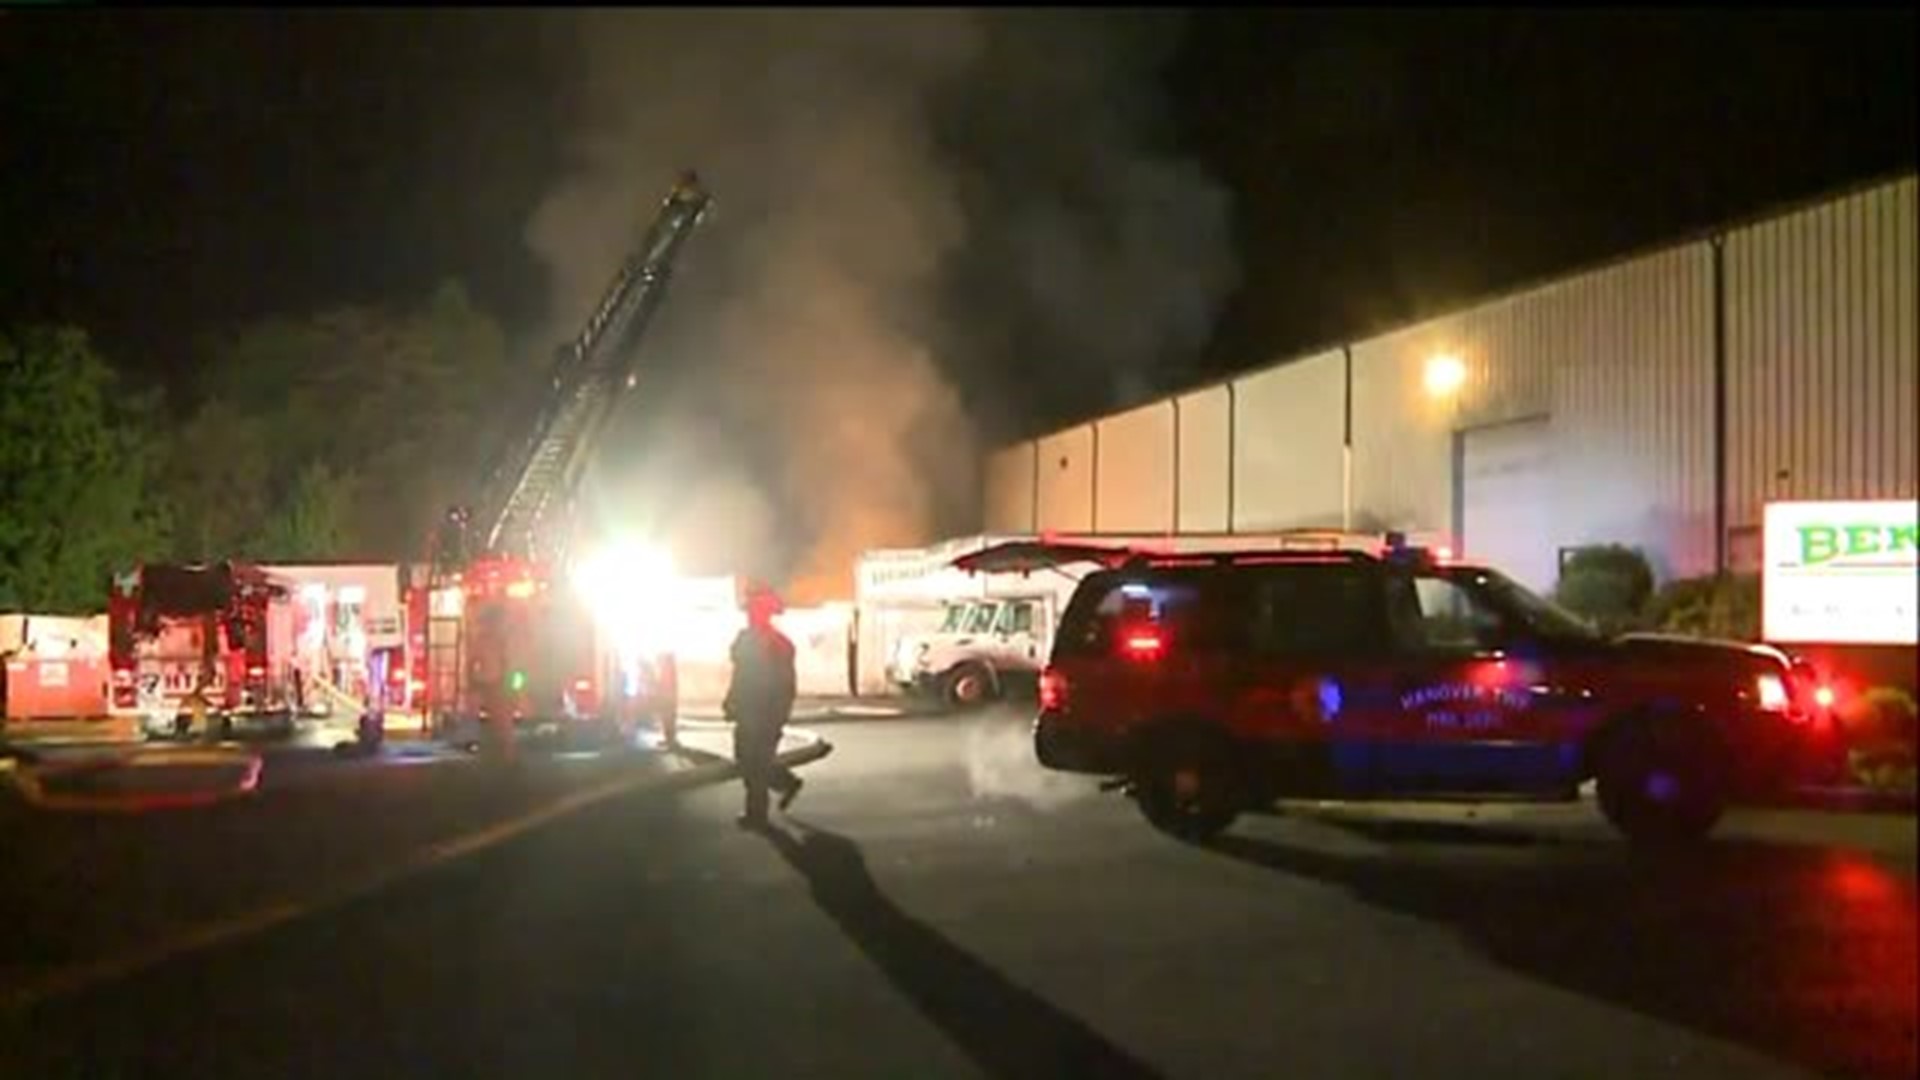 ATV`s, Pallets and Storage Containers Burn During Fire